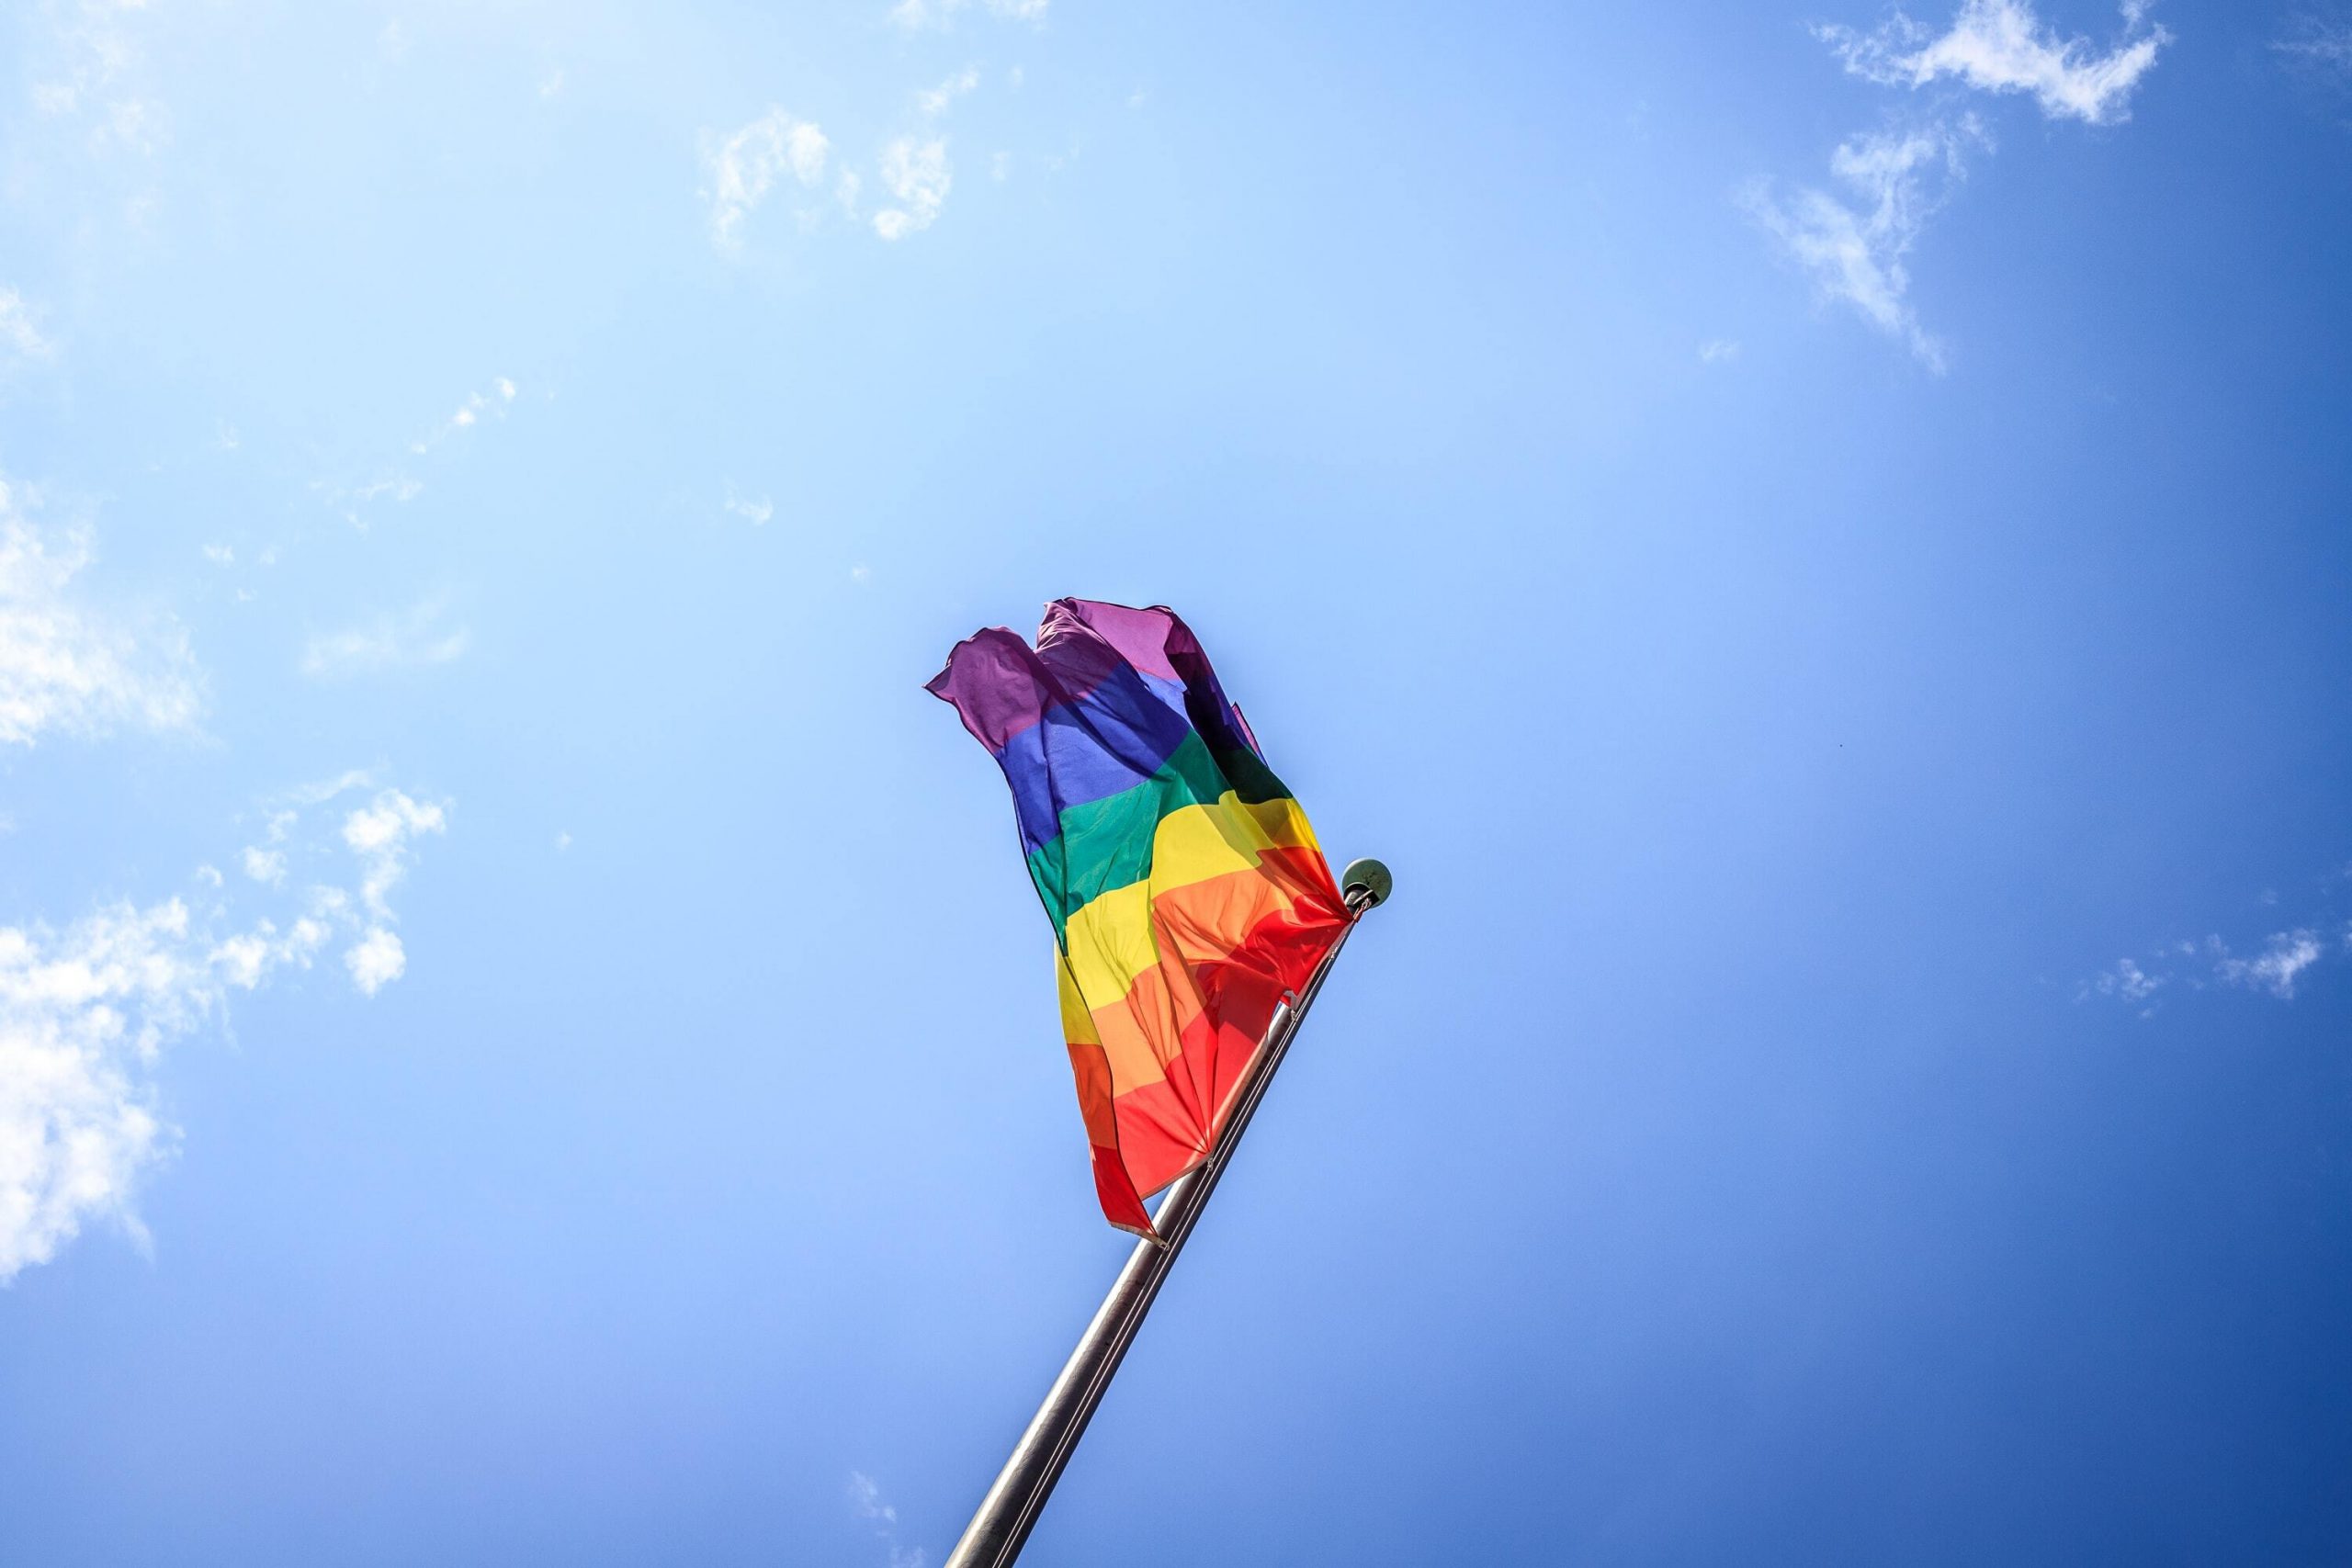 tim bieler 8WgQ DIEBJY unsplash scaled - Create socially inclusive content this Mardi Gras...It's more than just a rainbow.